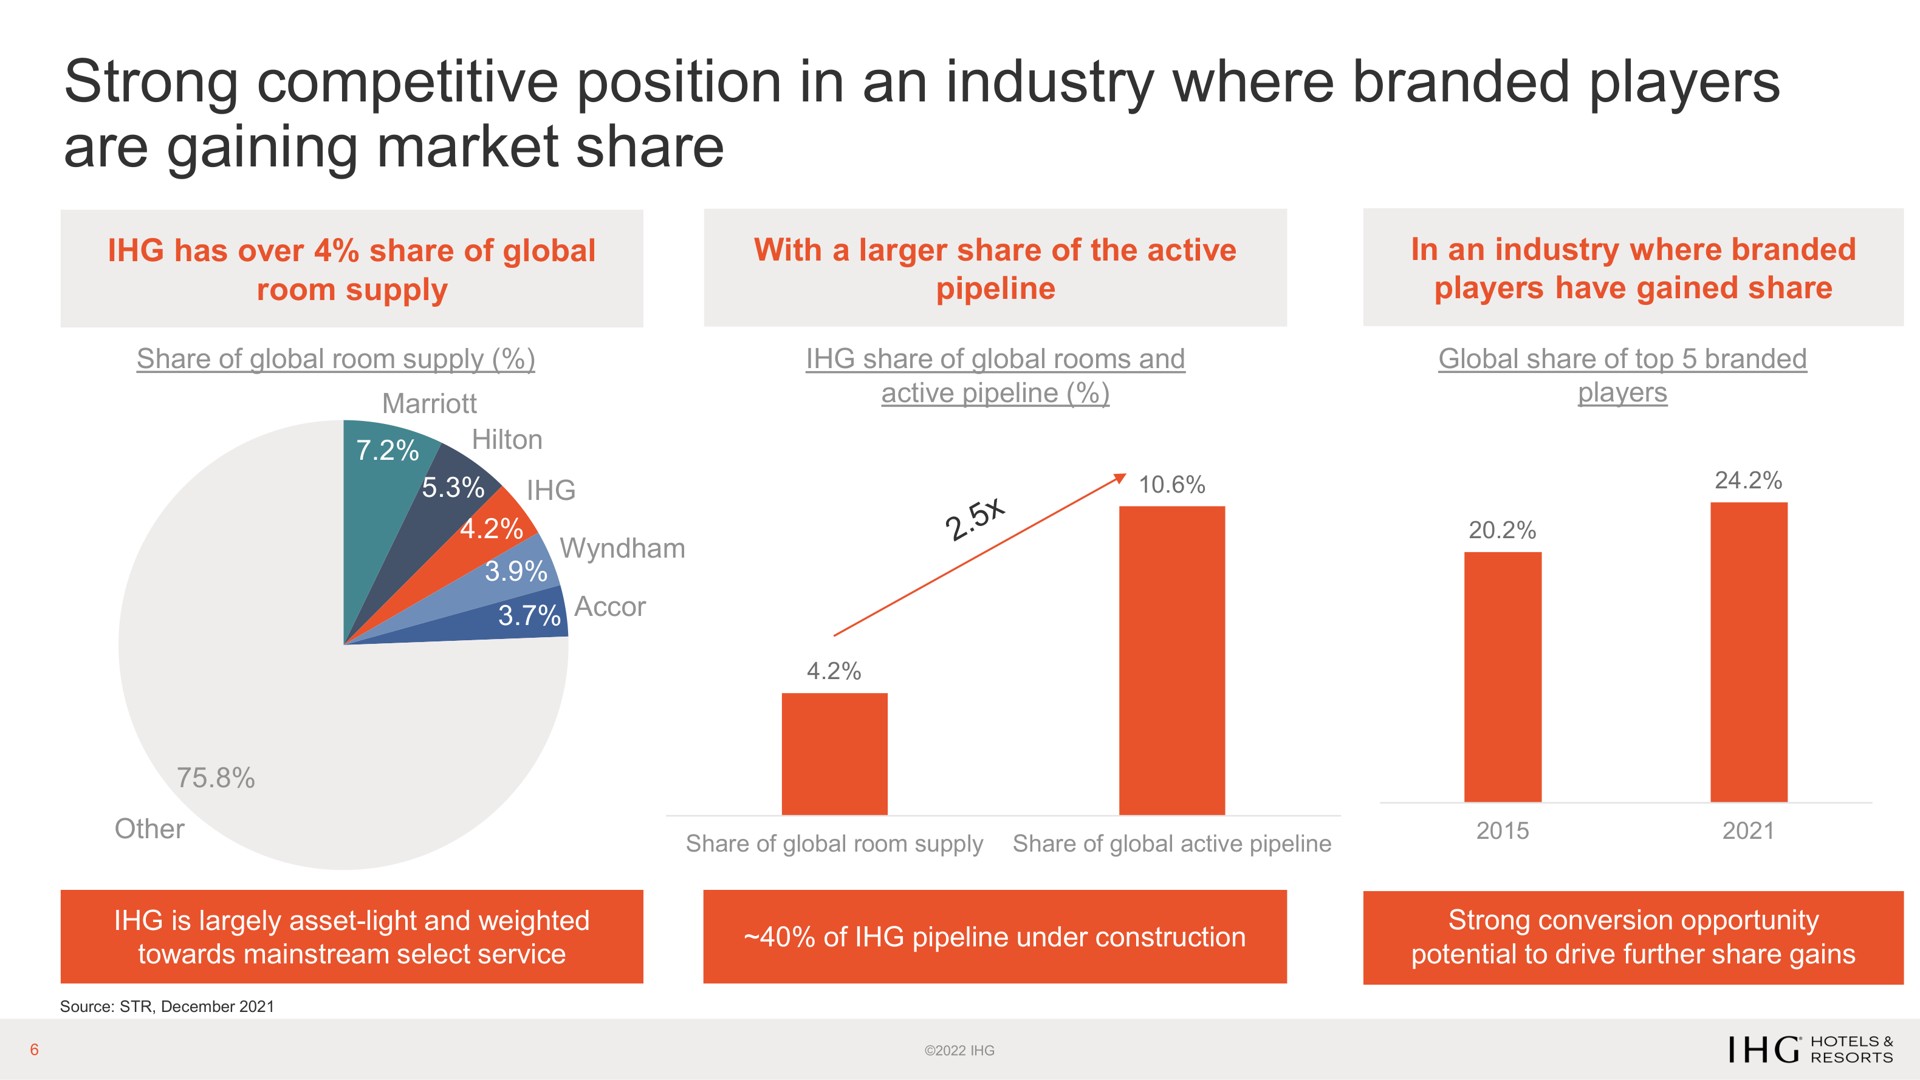 strong competitive position in an industry where branded players are gaining market share | IHG Hotels